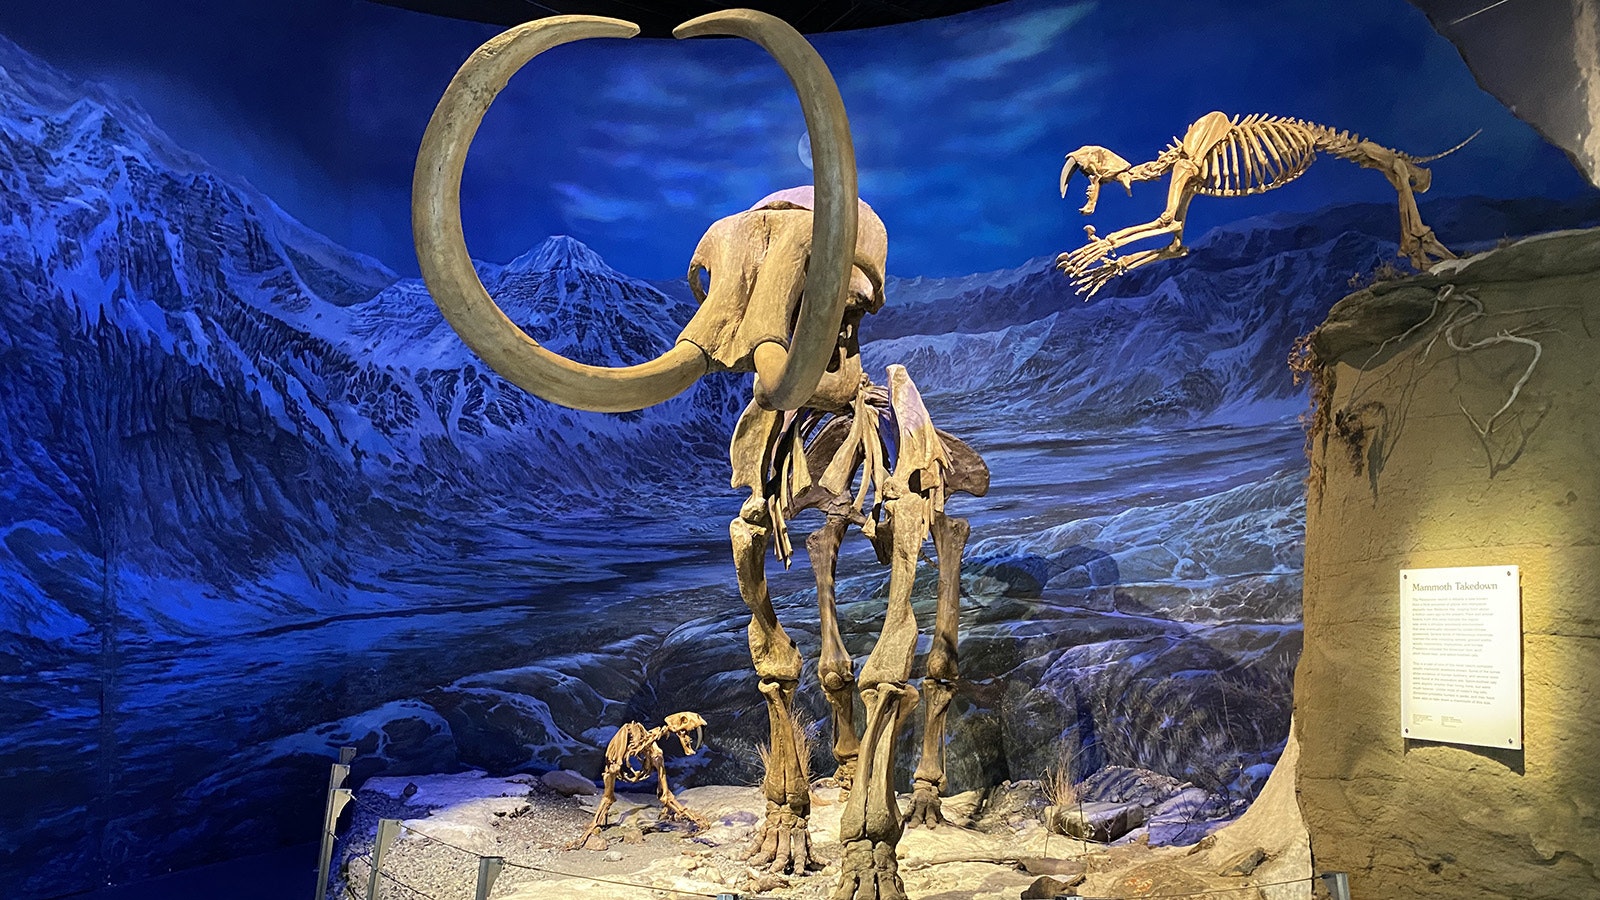 \A mounted skeleton of a wooly mammoth at the Royal Tyrrell Museum of Paleontology in Alberta, Canada. Colossal Biosciences has committed to "resurrecting" the wooly mammoth, technically a mammoth-Asian elephant hybrid, by 2028.